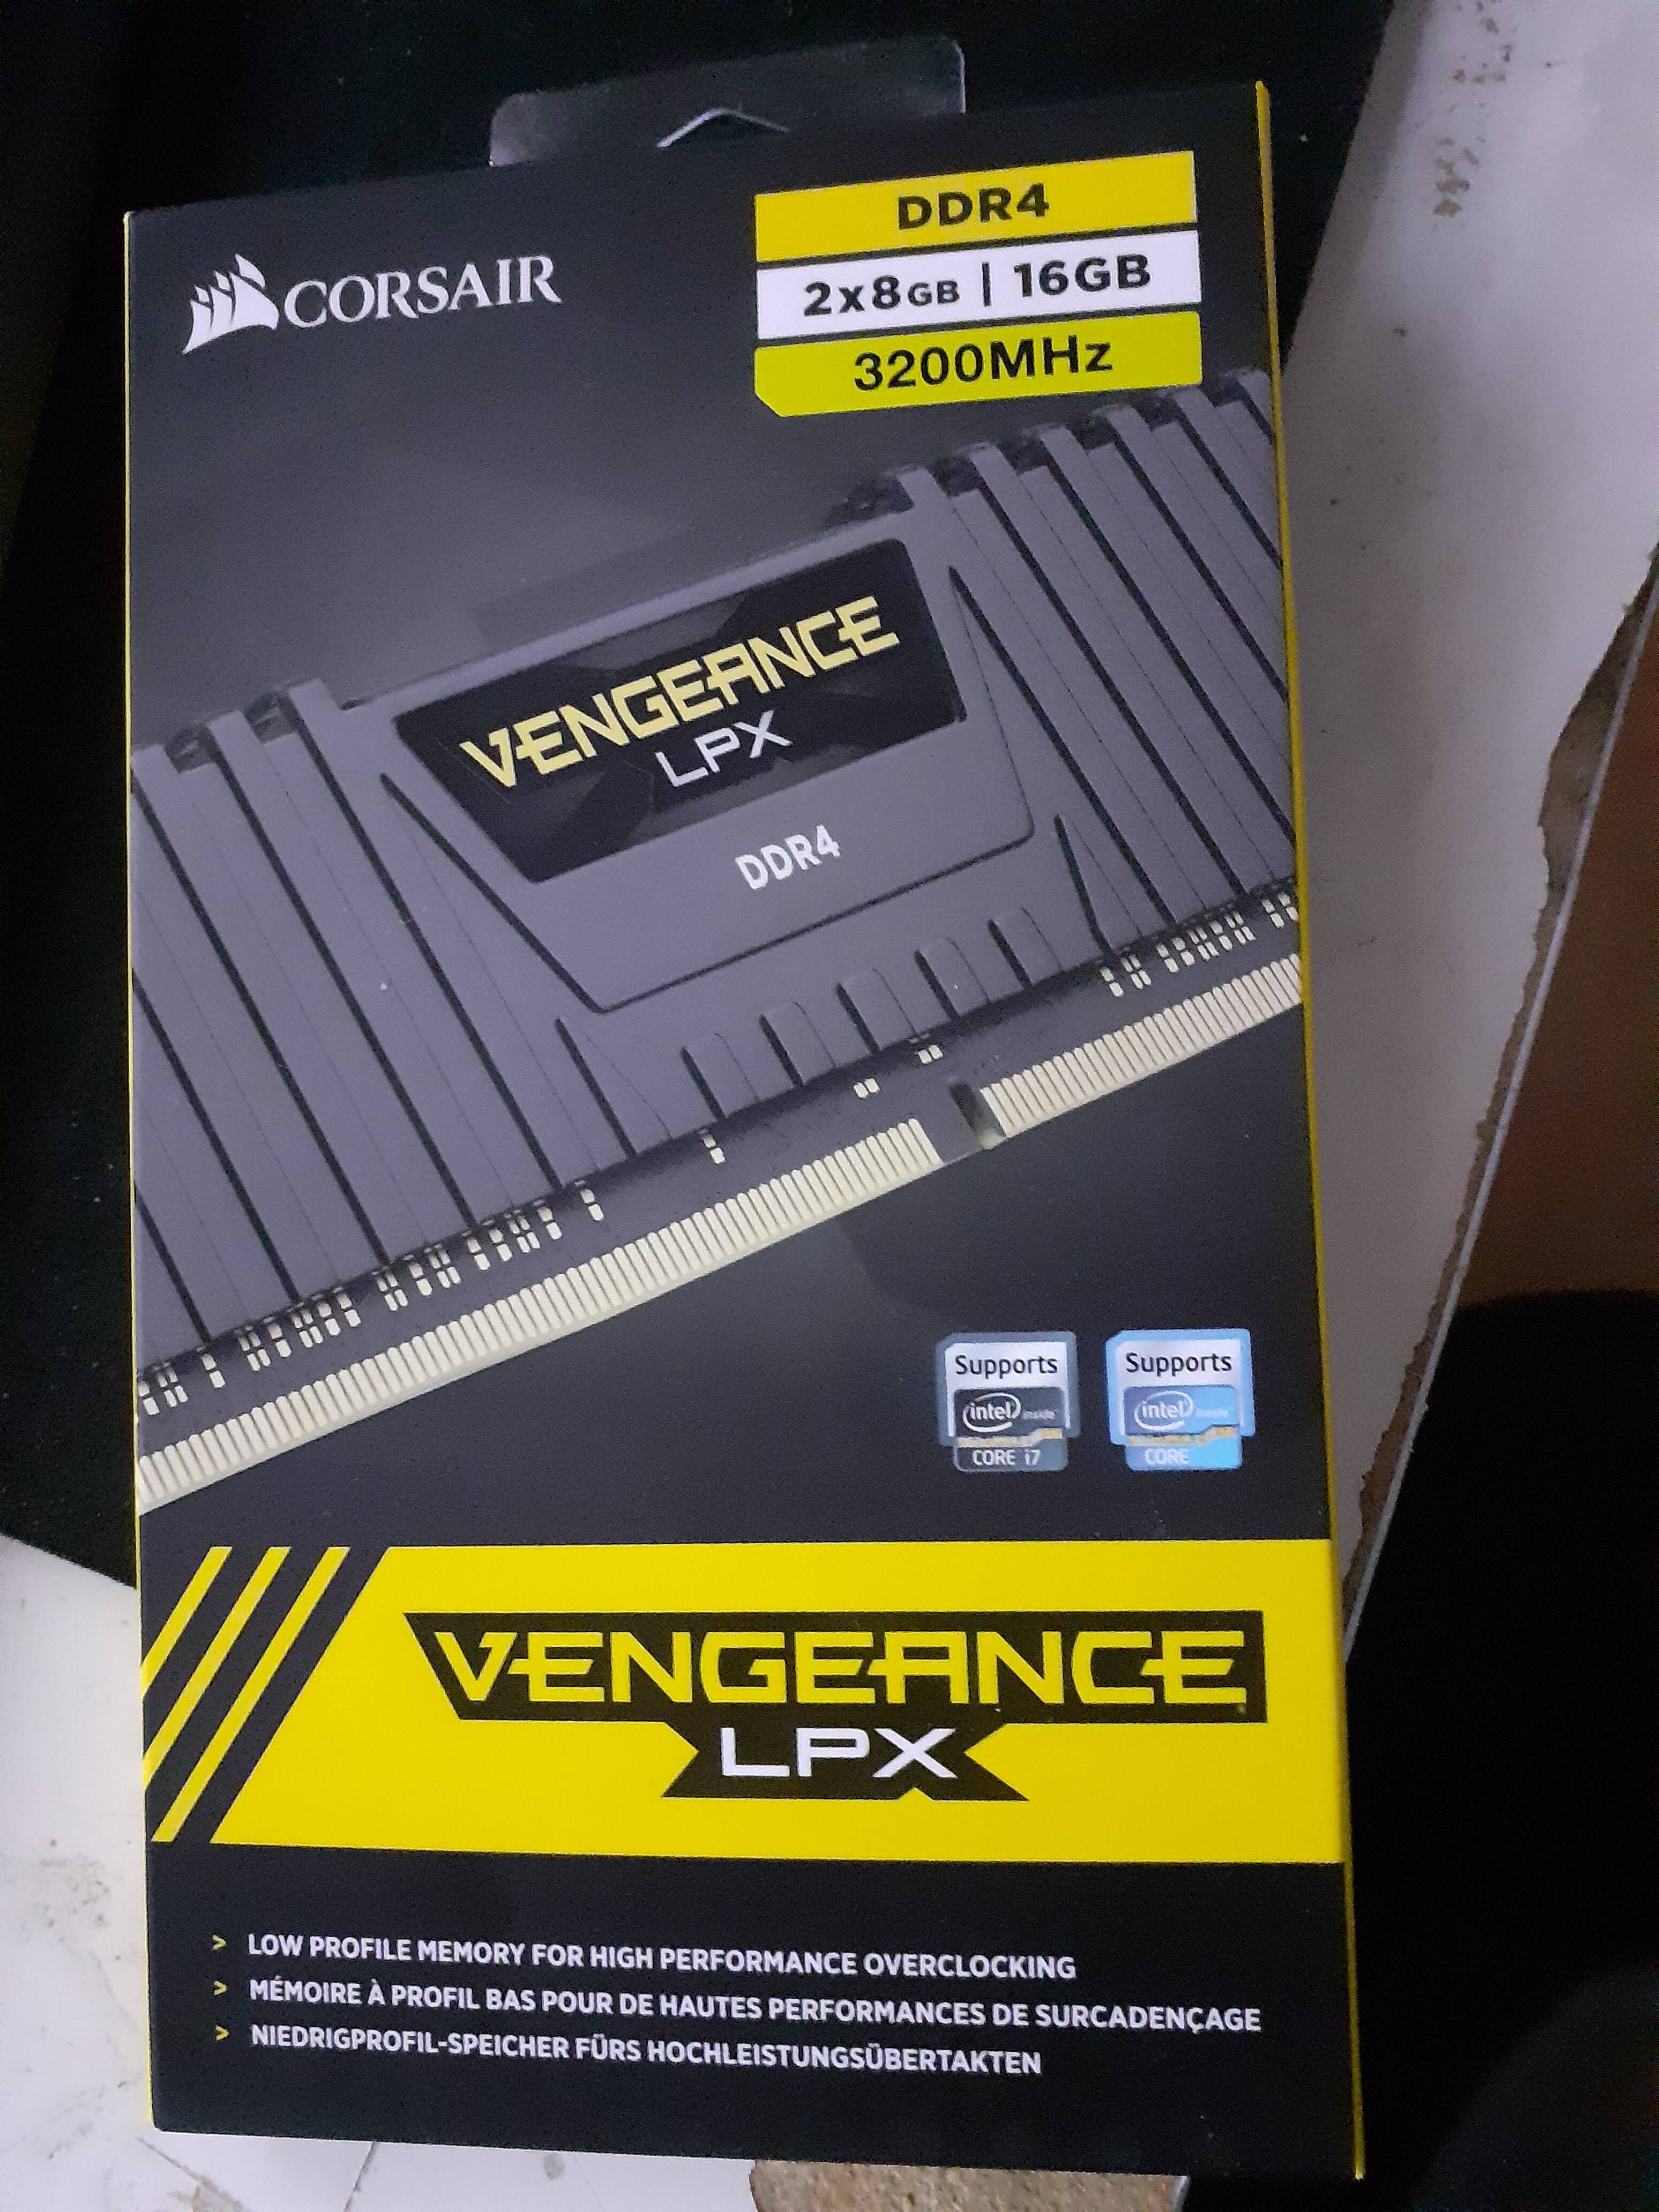 corsair vengeance lpx support intel and amd? - CPUs, Motherboards, and - Linus Tech Tips